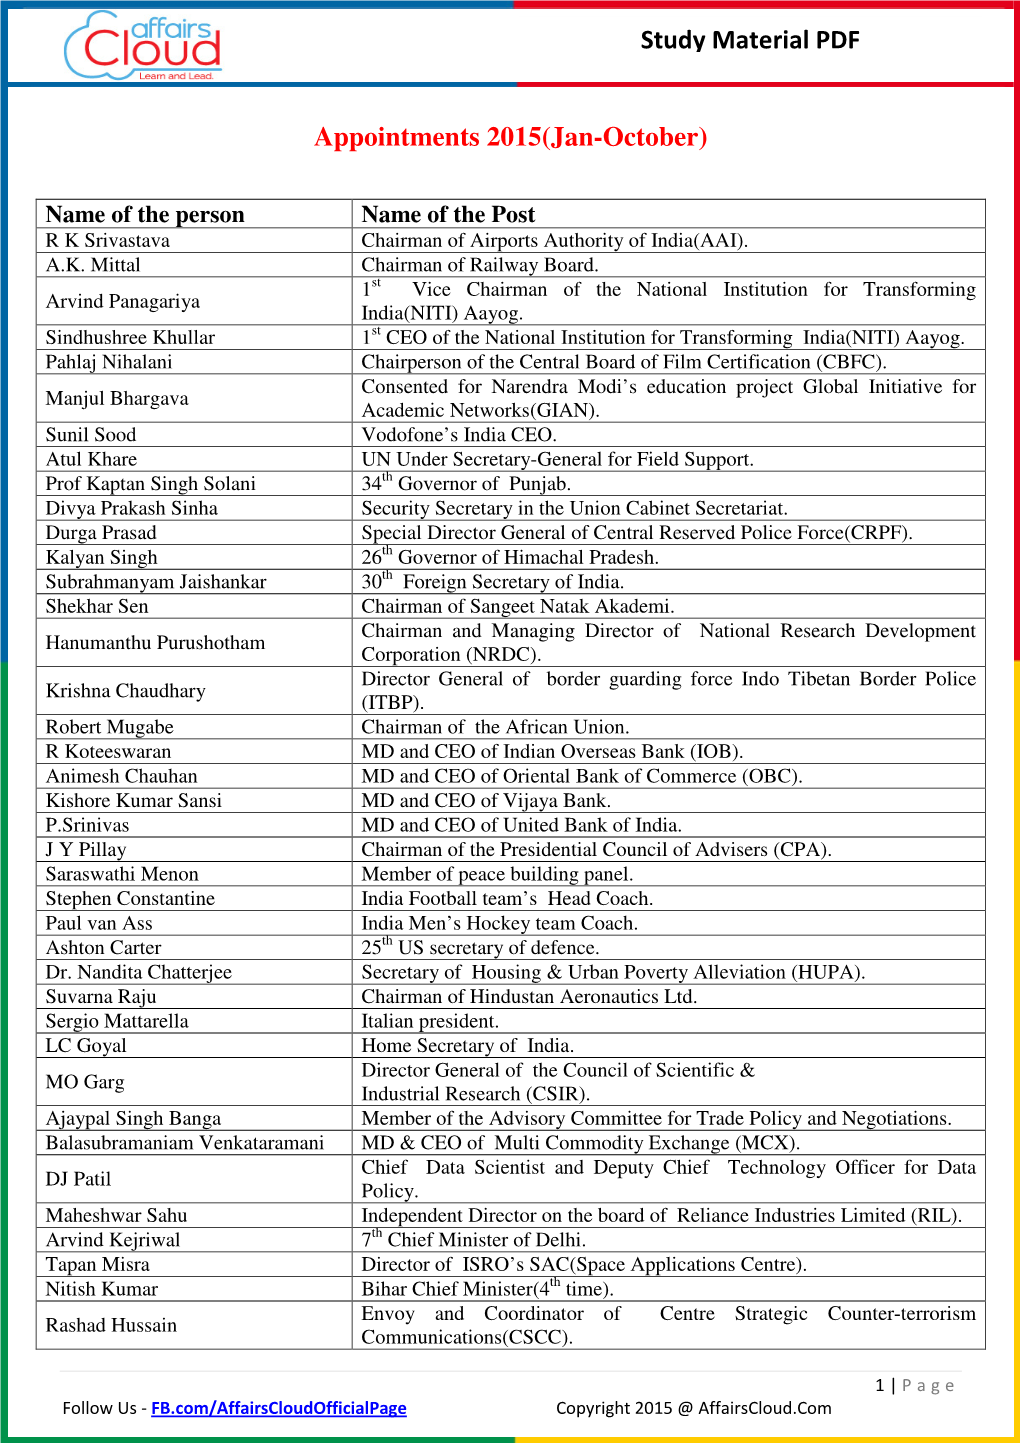 Study Material PDF Appointments 2015(Jan-October)